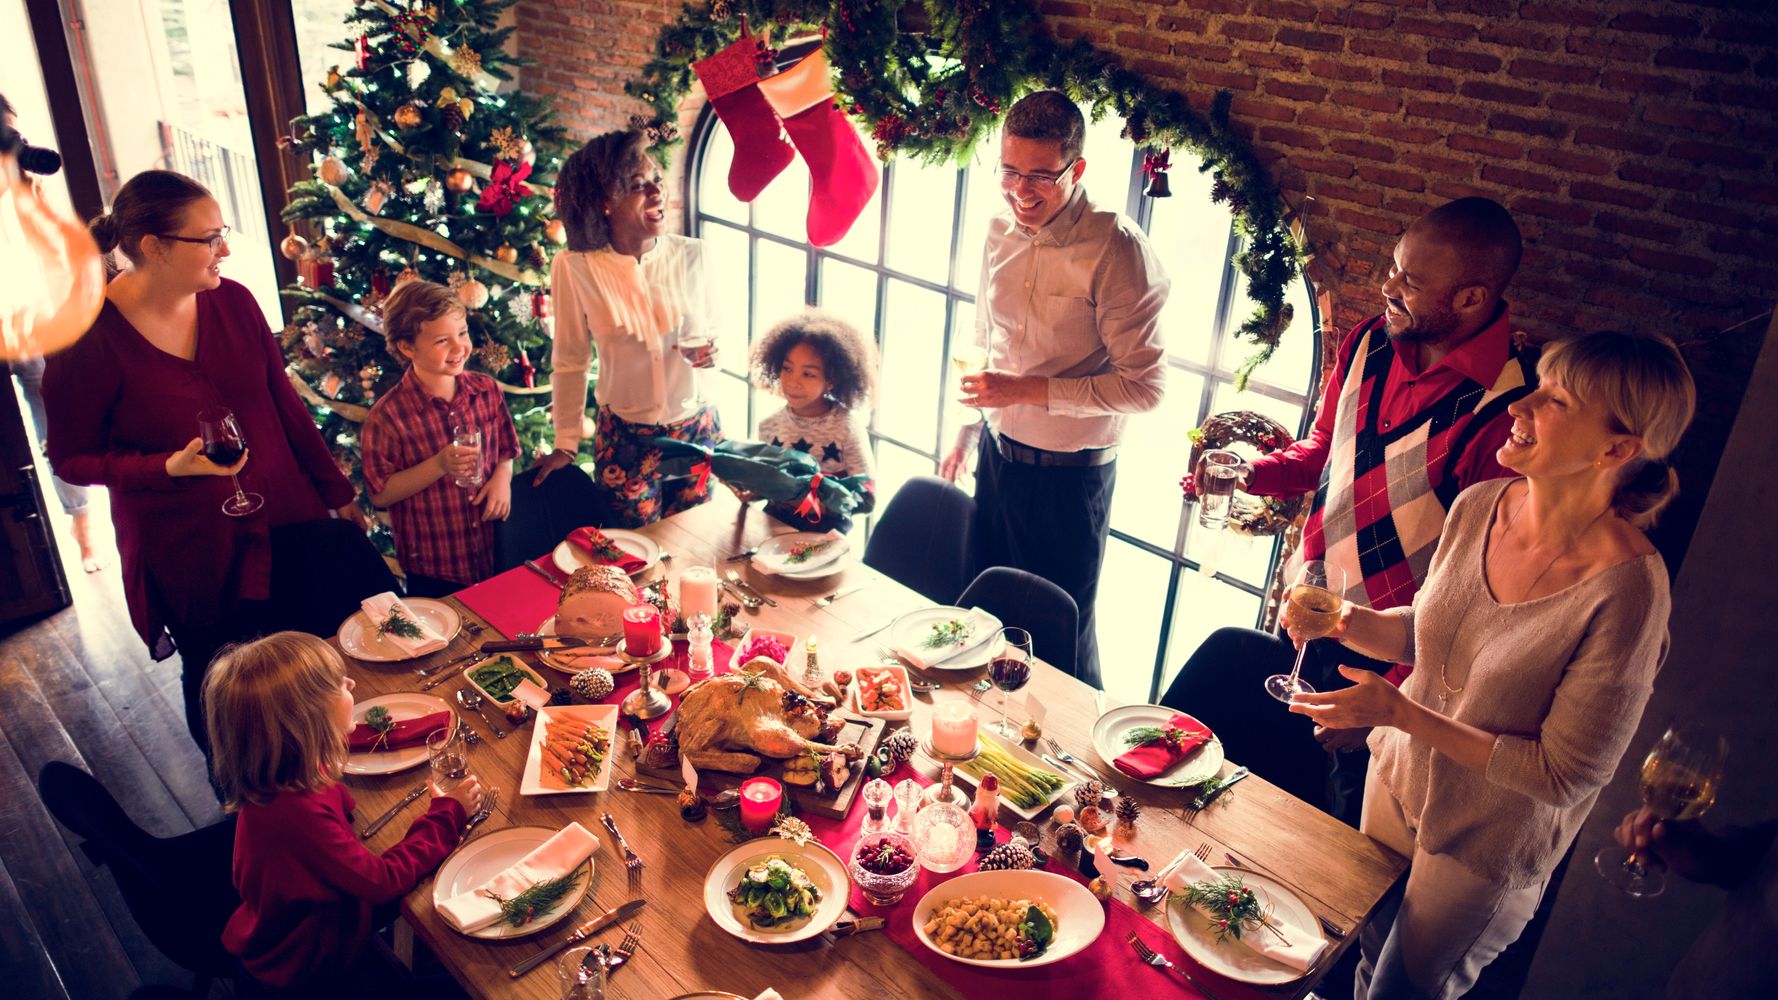 Is It Safe To Have A Small Party For Christmas? Experts Weigh In.